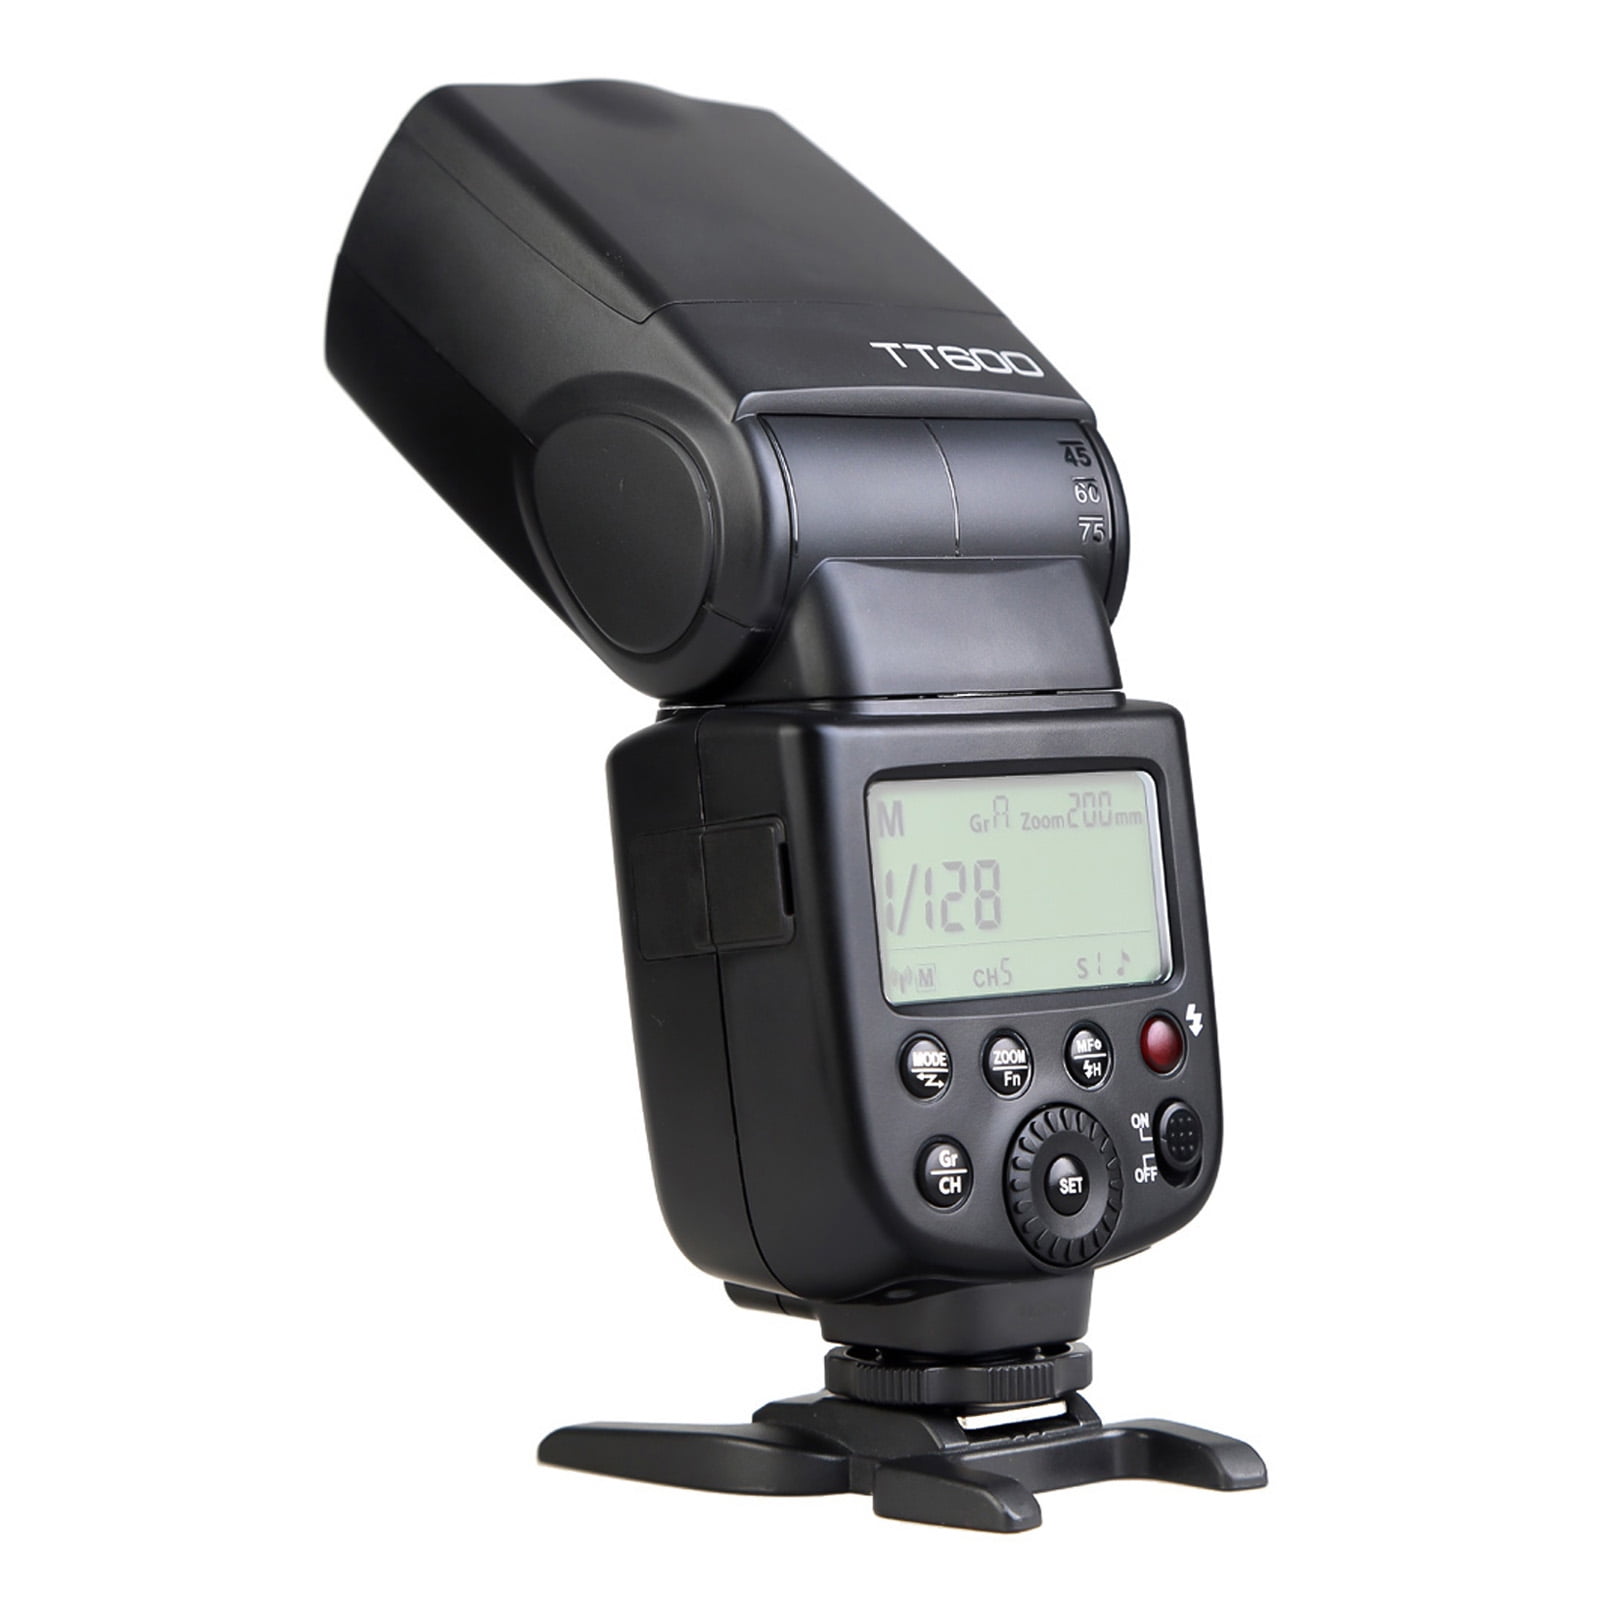 Godox Thinklite TT600 Camera Flash Speedlite Master/Slave Flash with  Built-in 2.4G Wireless Trigger System GN60 for DSLR Cameras Compatible with  AD360II-C AD360II-N TT685C TT685N Flash X1T-C 